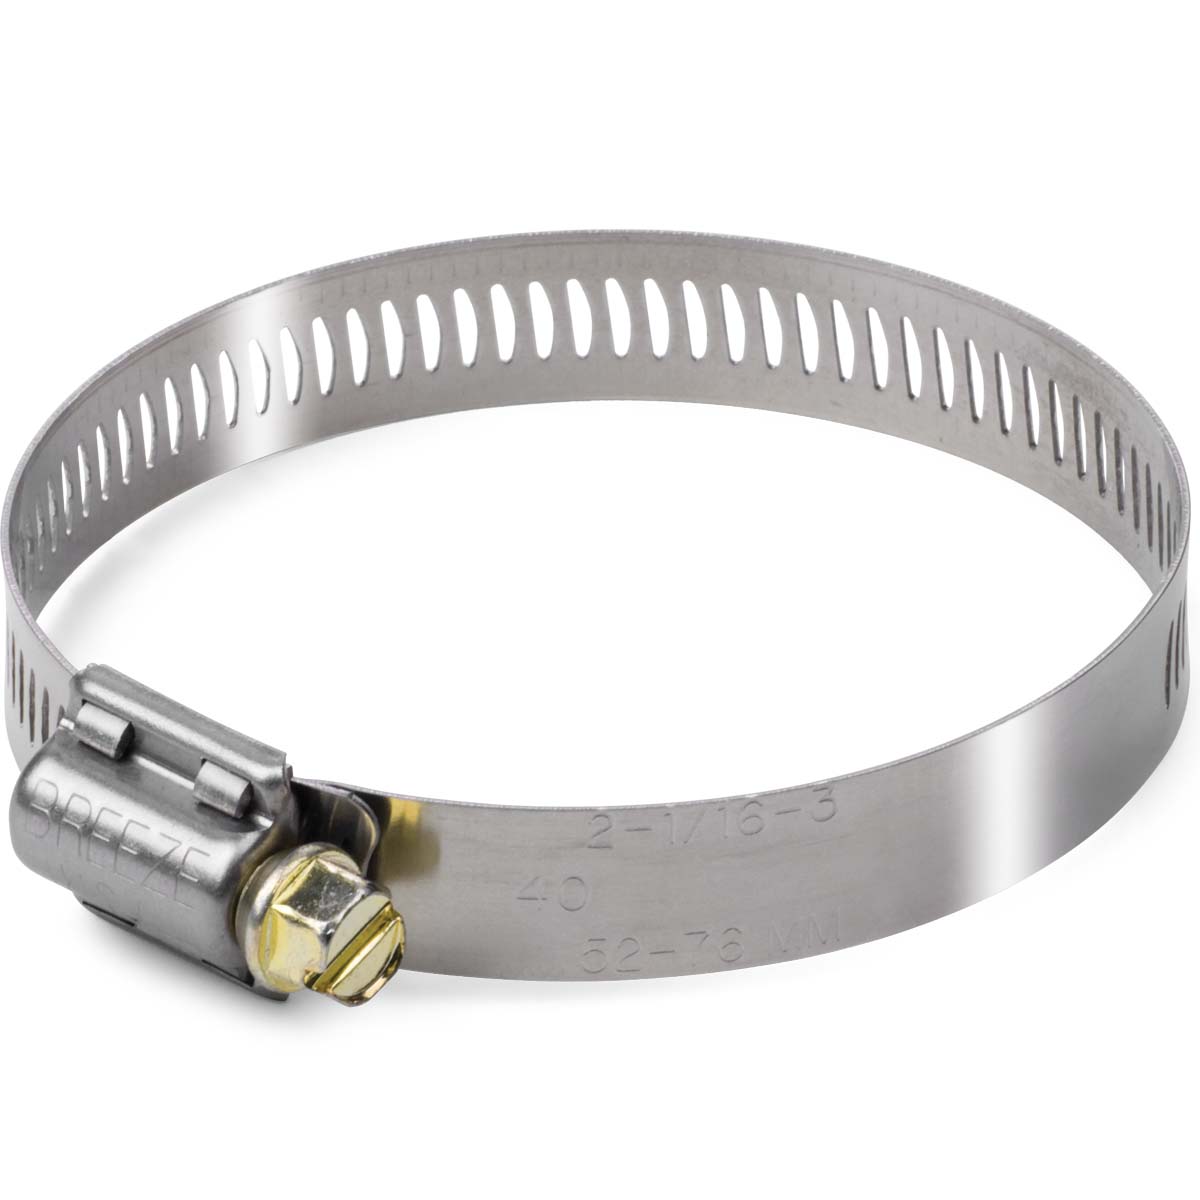 All Stainless Steel Hose Clamp, 1/2 Bandwidth, Pack of 10 Pieces (Size #6,  3/8 ~ 7/8)